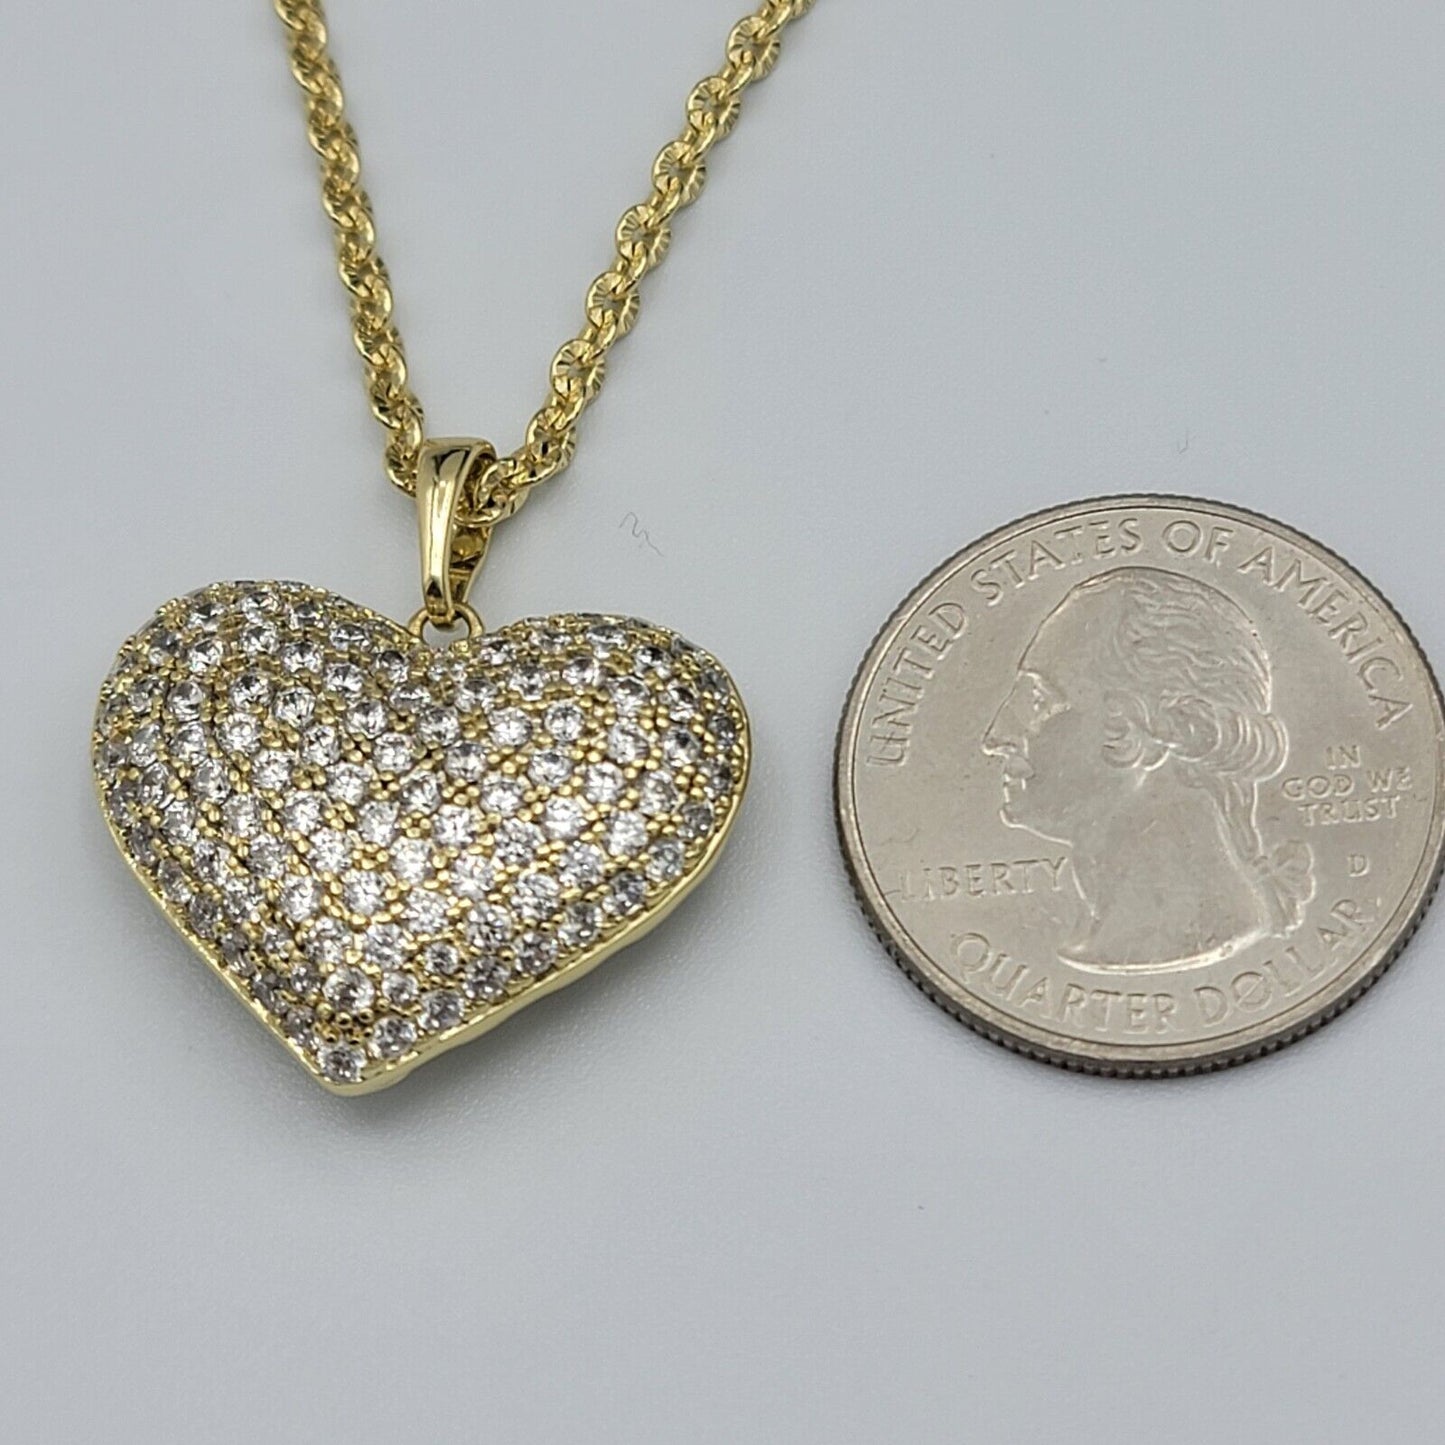 Necklaces - 14K Gold Plated. Crystal Puffed Icy LOVE HEART Pendant & Chain.